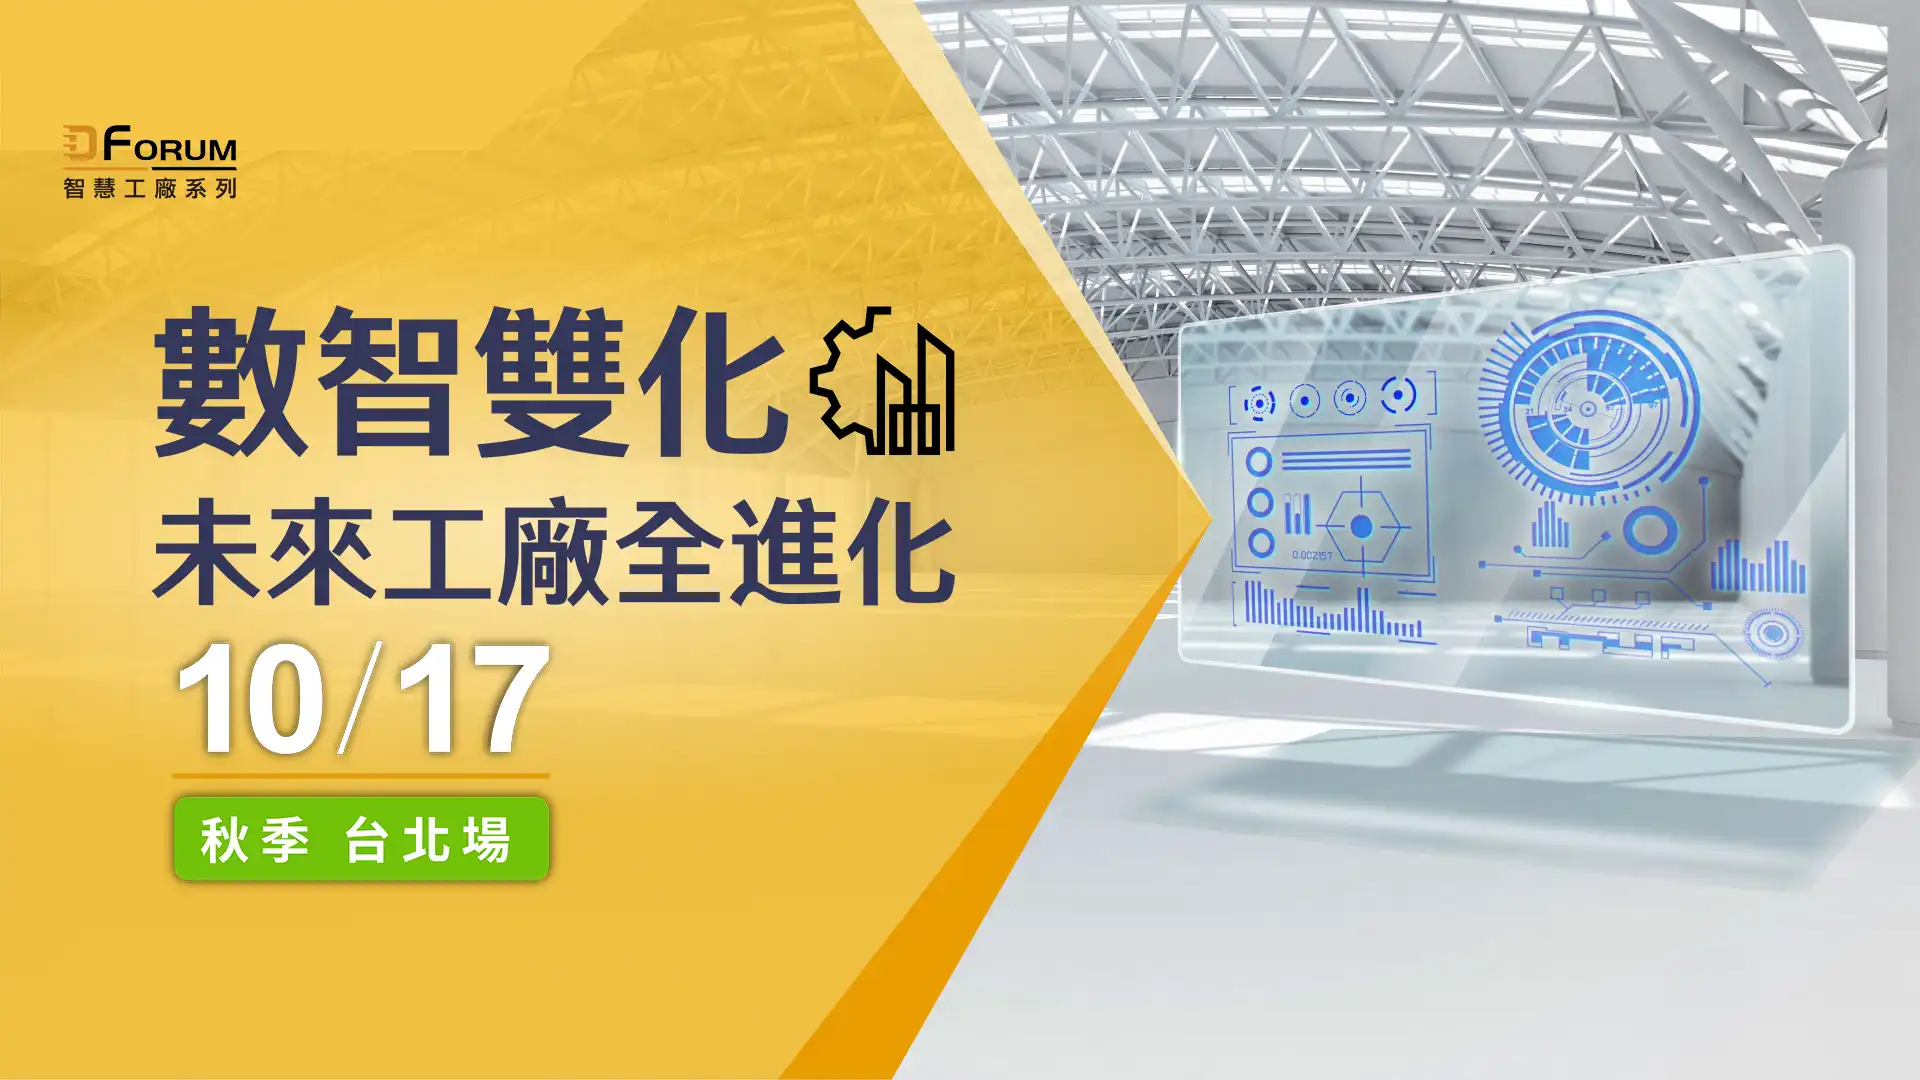 You are currently viewing 2023 D Forum 智慧工廠系列：數智無界、製造無限 秋季台北場